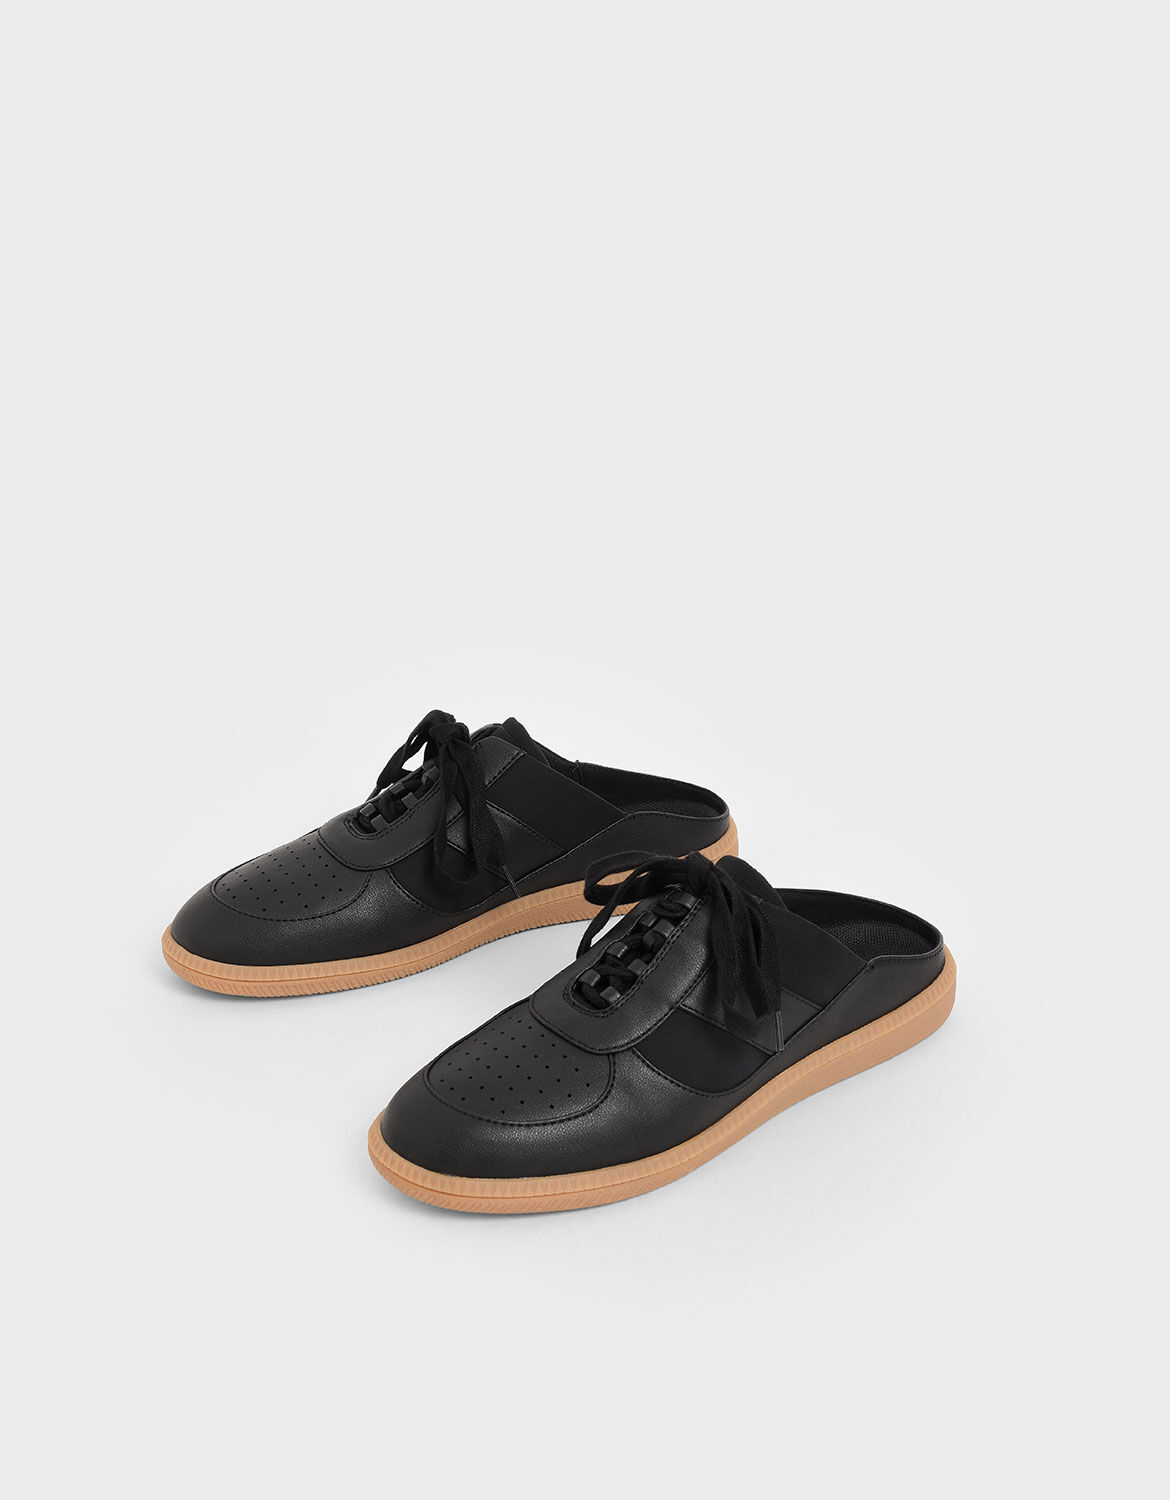 Black Lace Up Sneaker Mules | CHARLES 